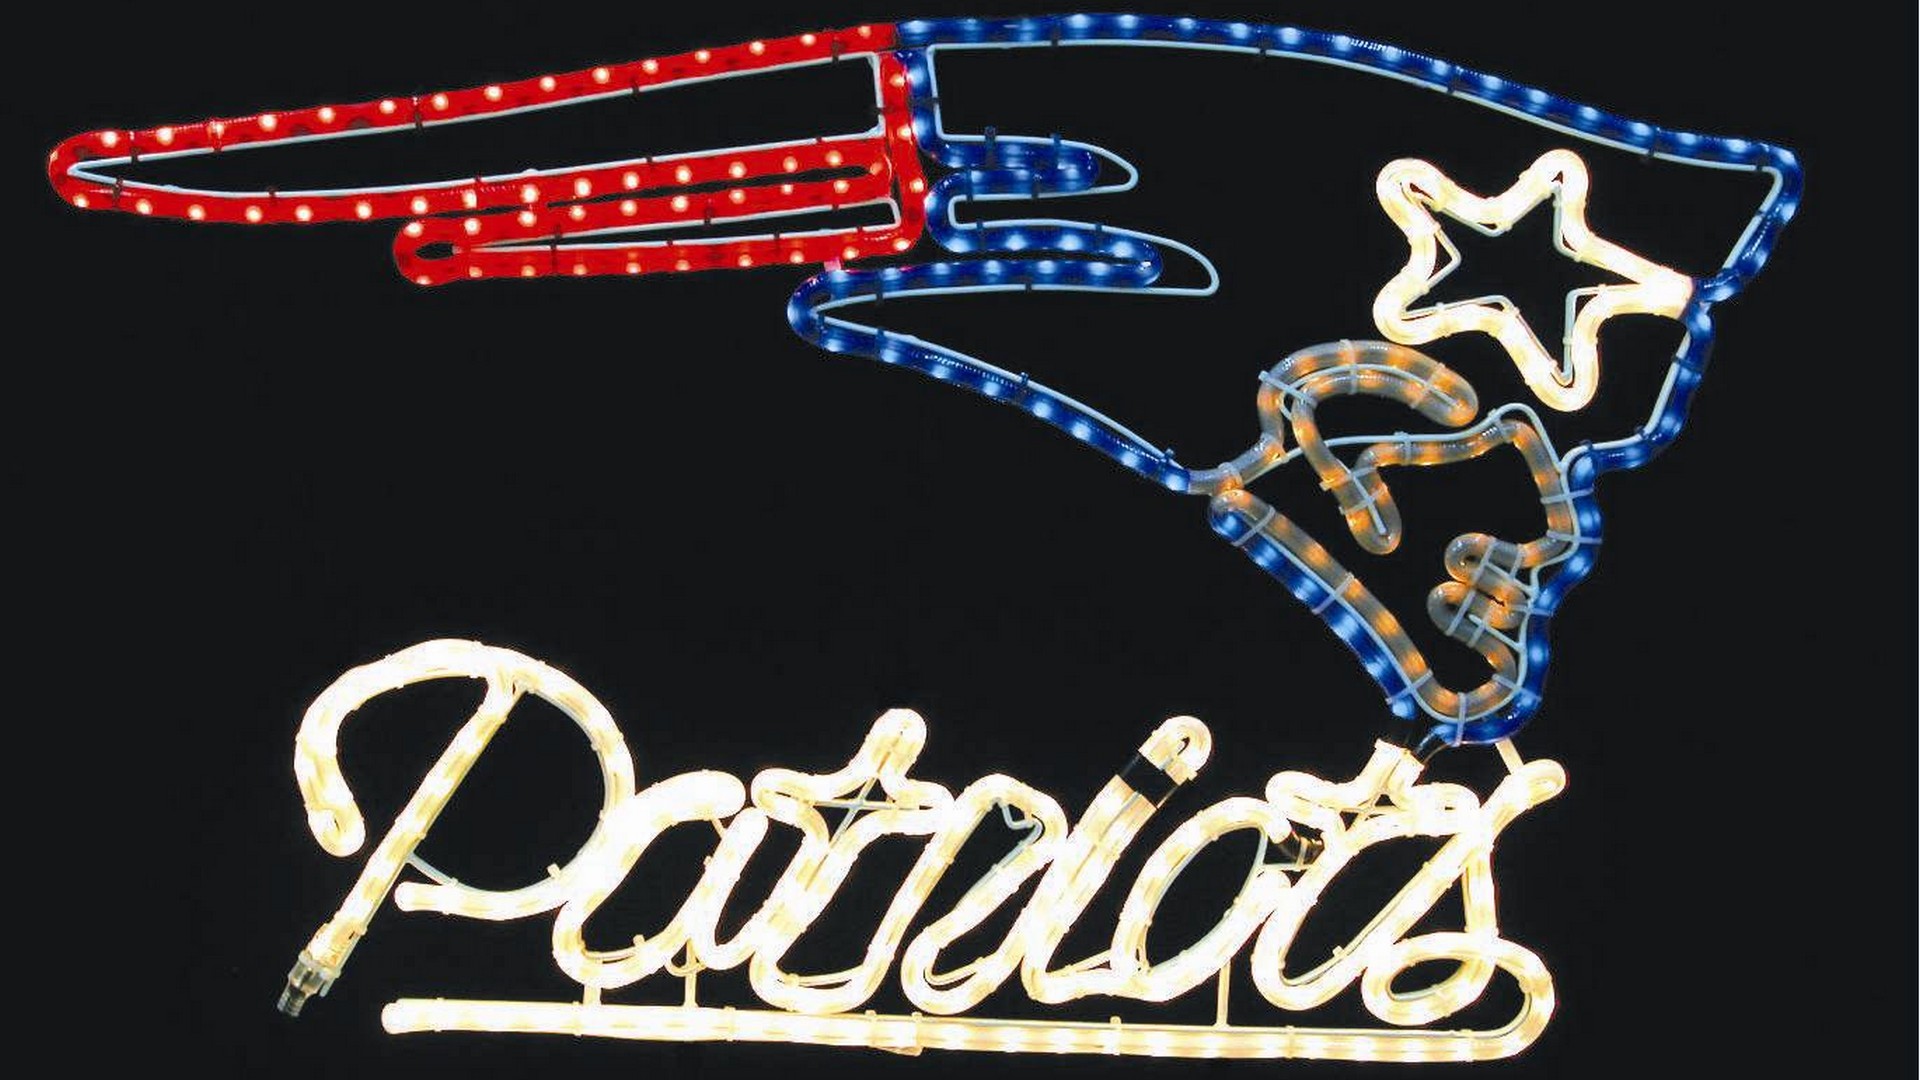 Backgrounds NE Patriots HD with resolution 1920x1080 pixel. You can make this wallpaper for your Mac or Windows Desktop Background, iPhone, Android or Tablet and another Smartphone device